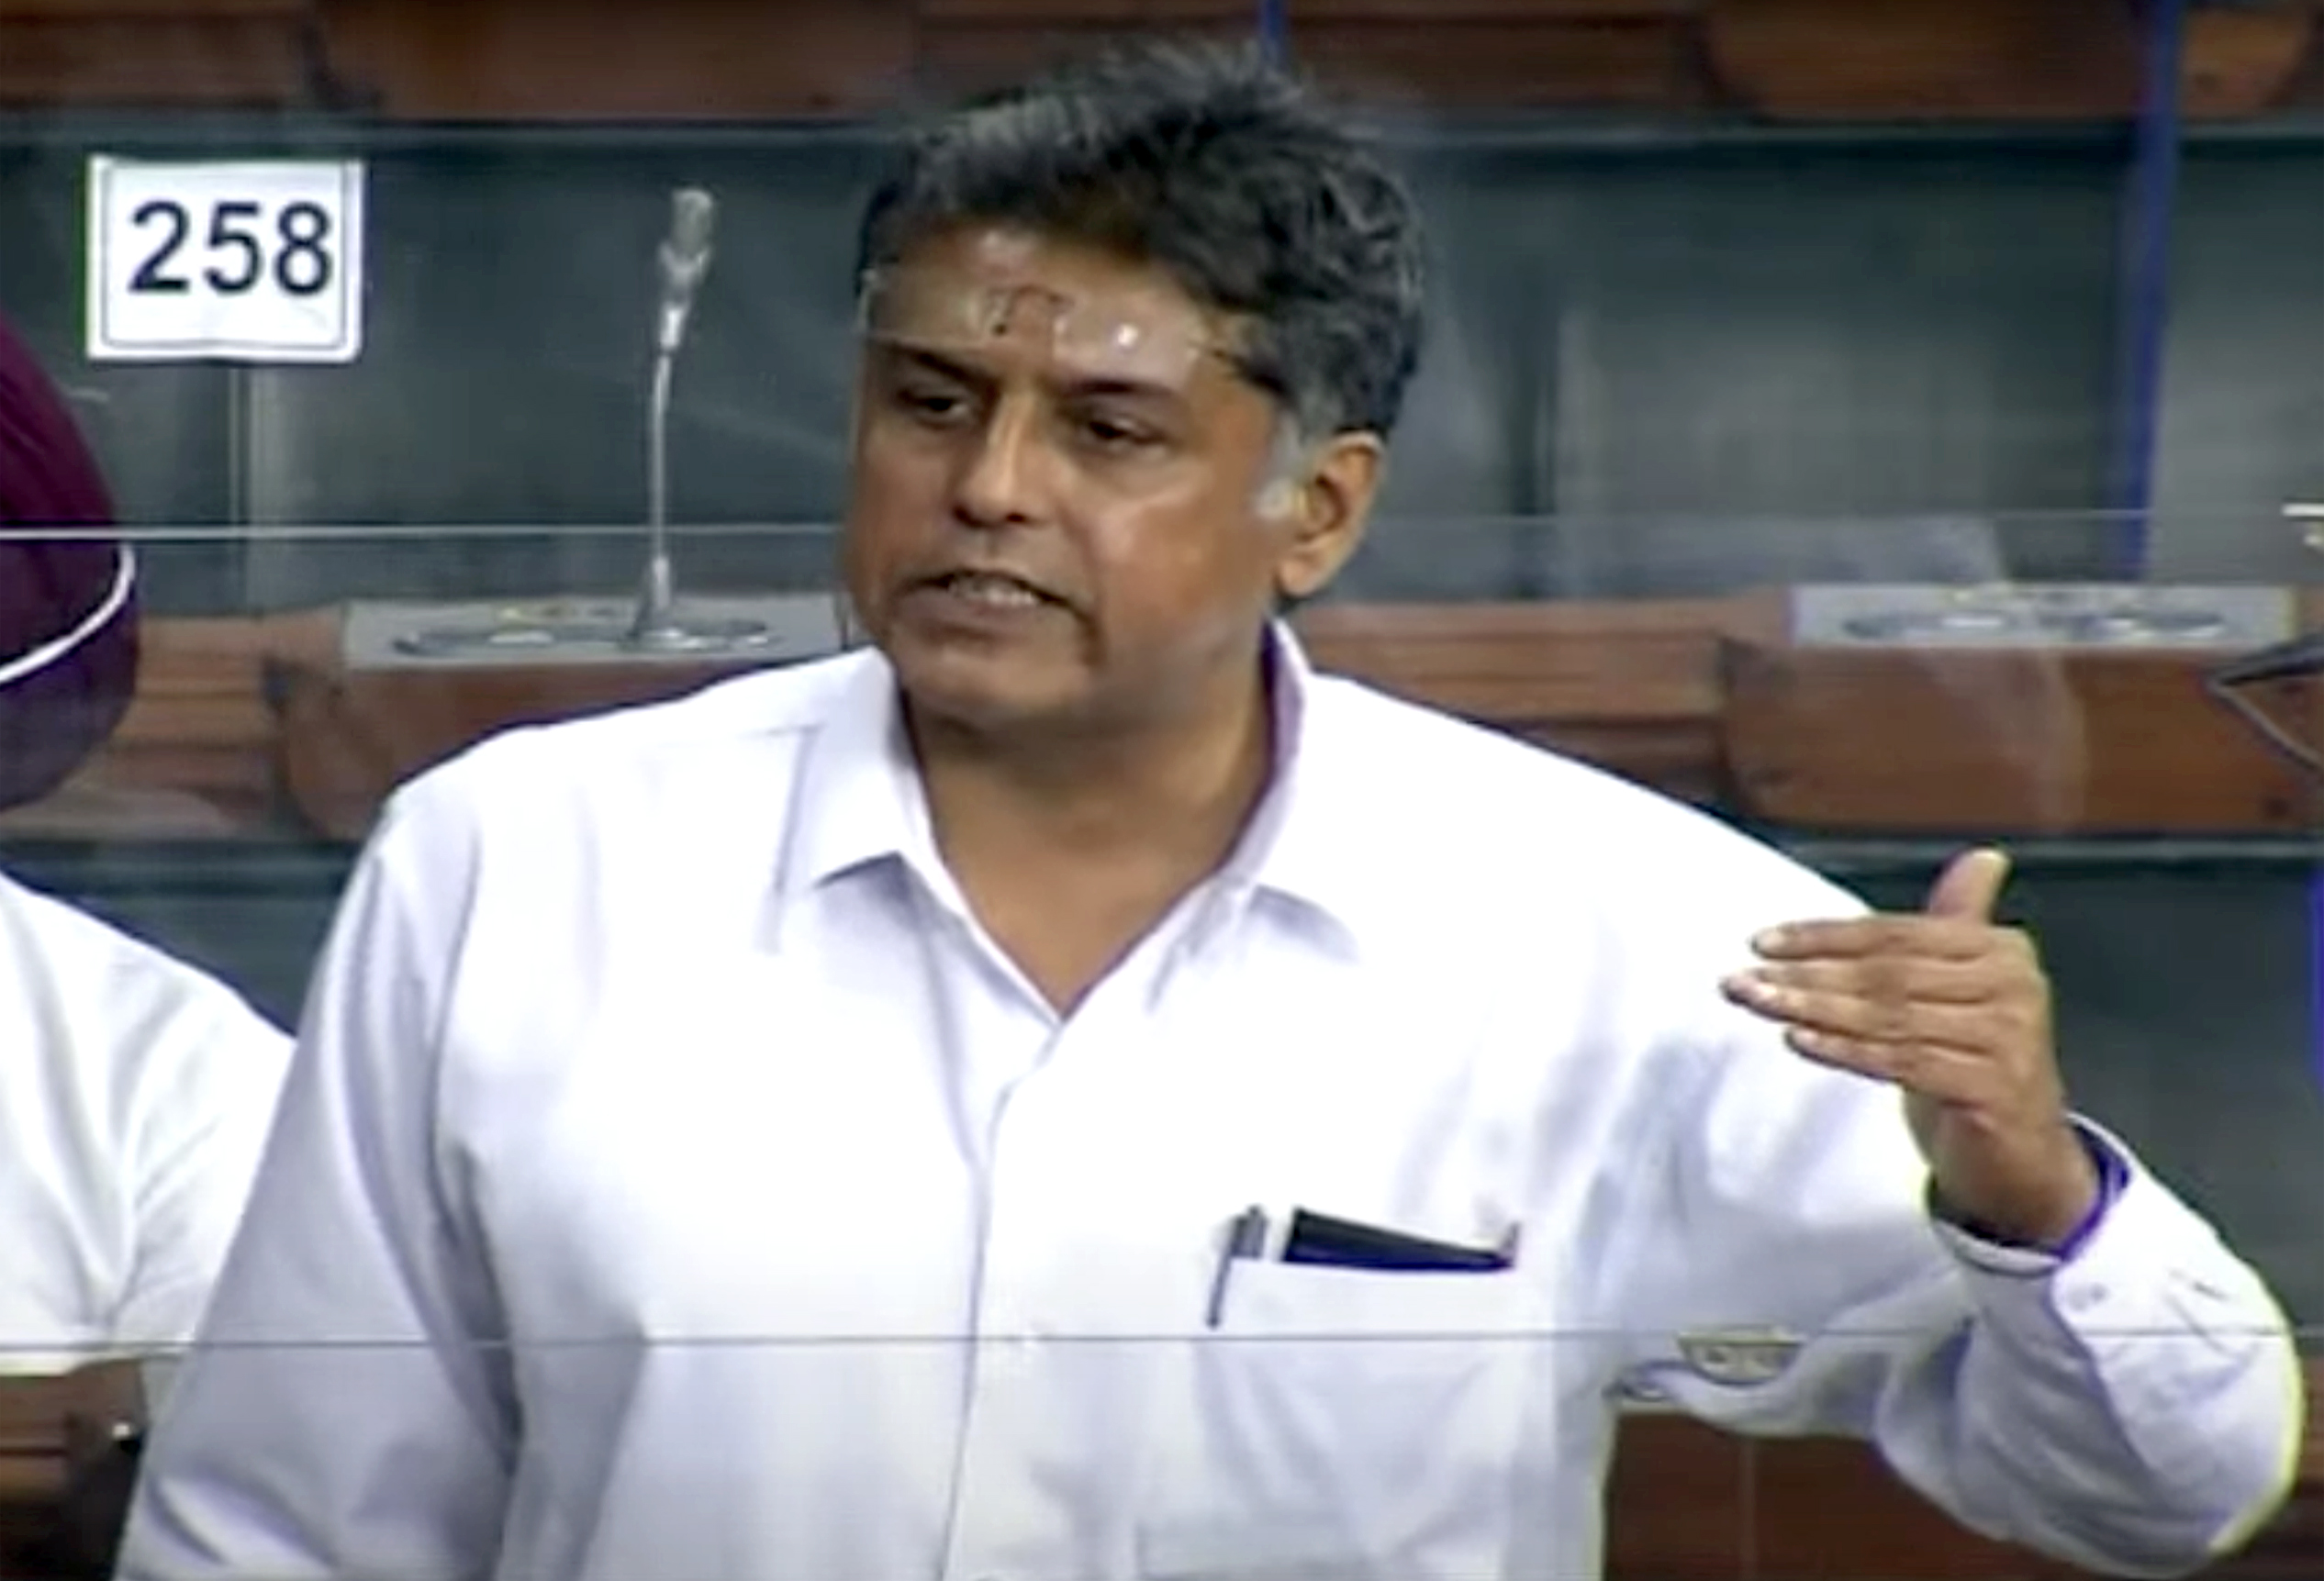 Congress MP Manish Tewari gives adjournment motion notice in LS to discuss border situation with China